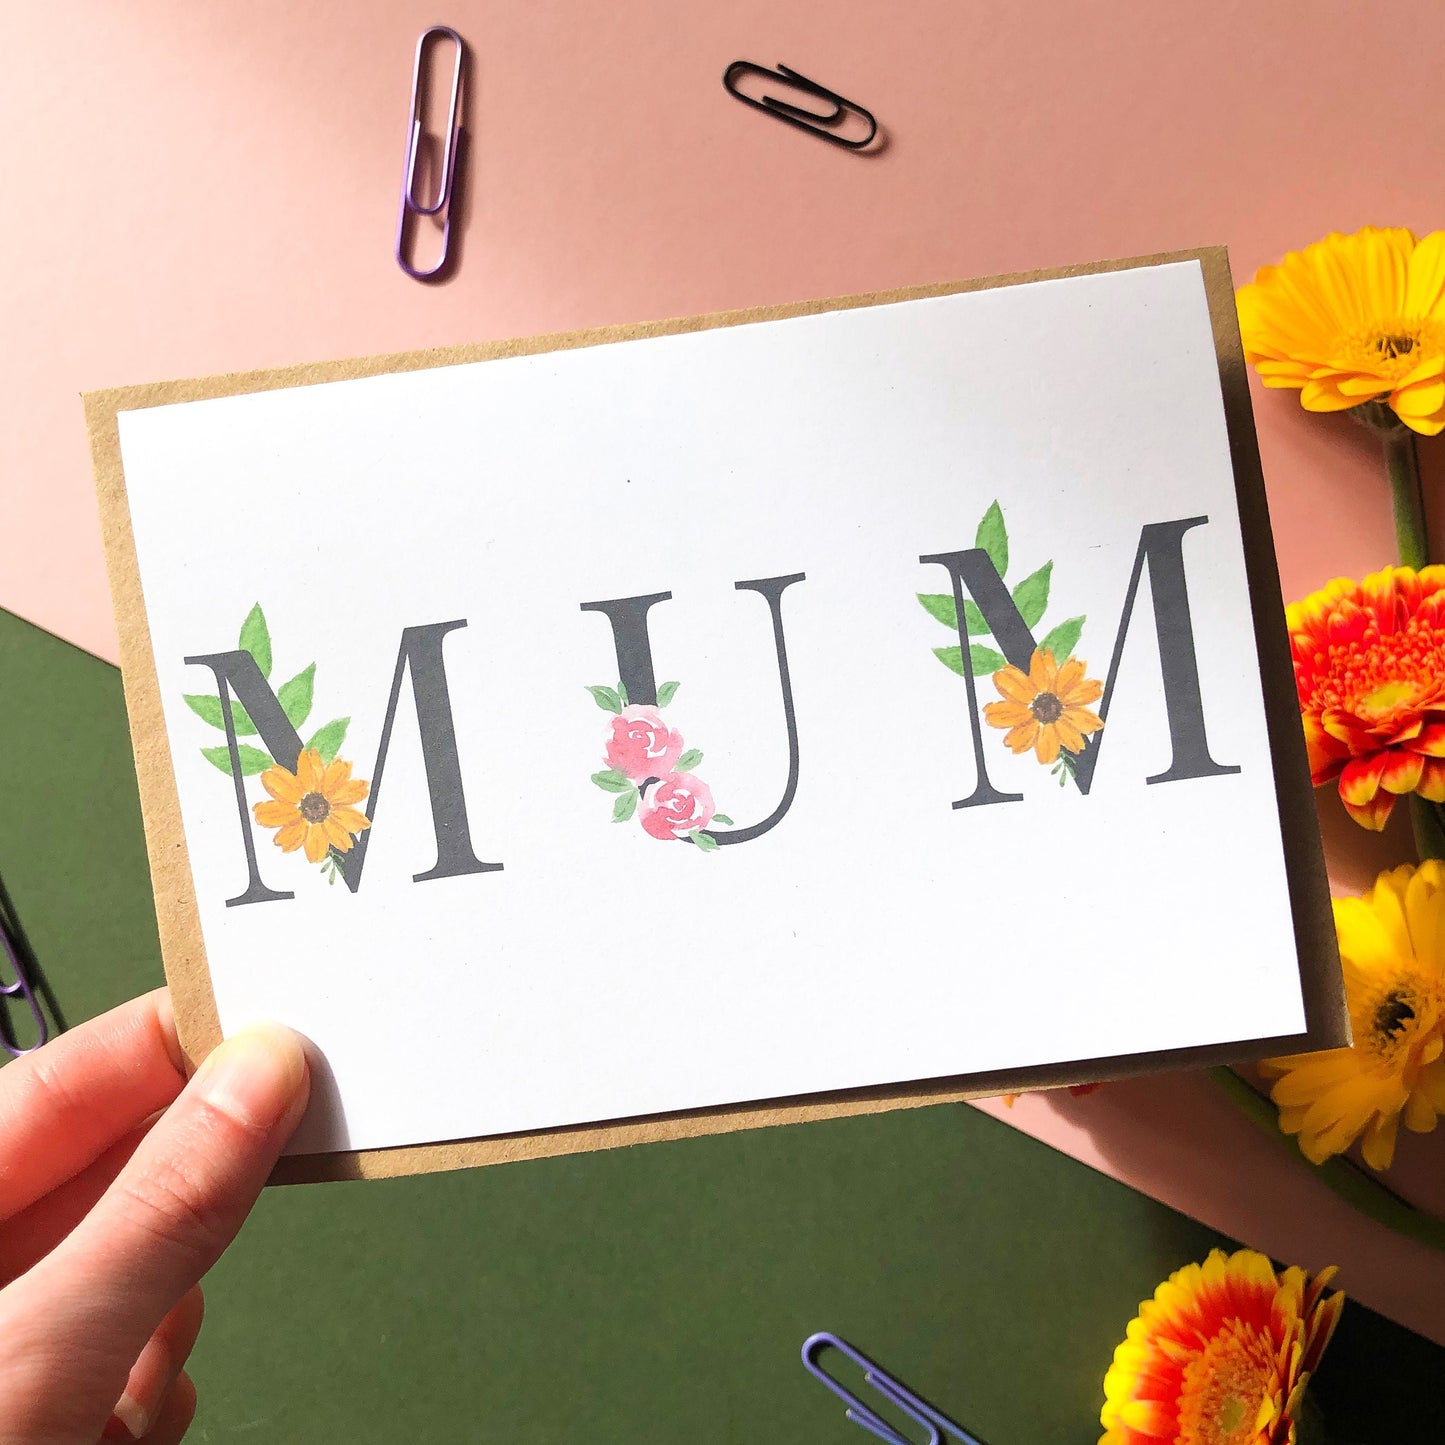 MUM Floral Birthday Card, Mother’s Day Card